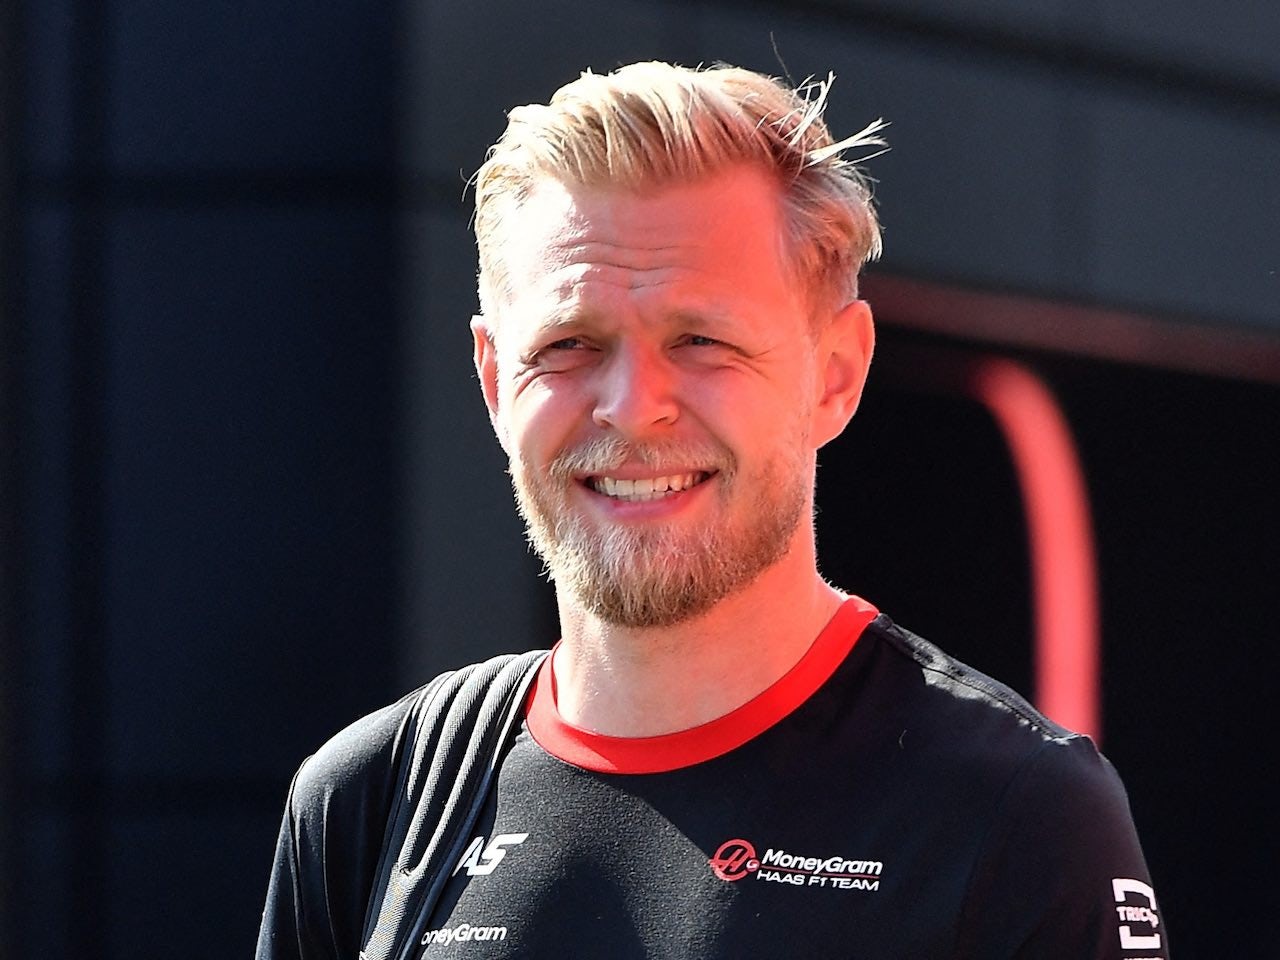 Magnussen open to post-F1 career in US, but not Indycar